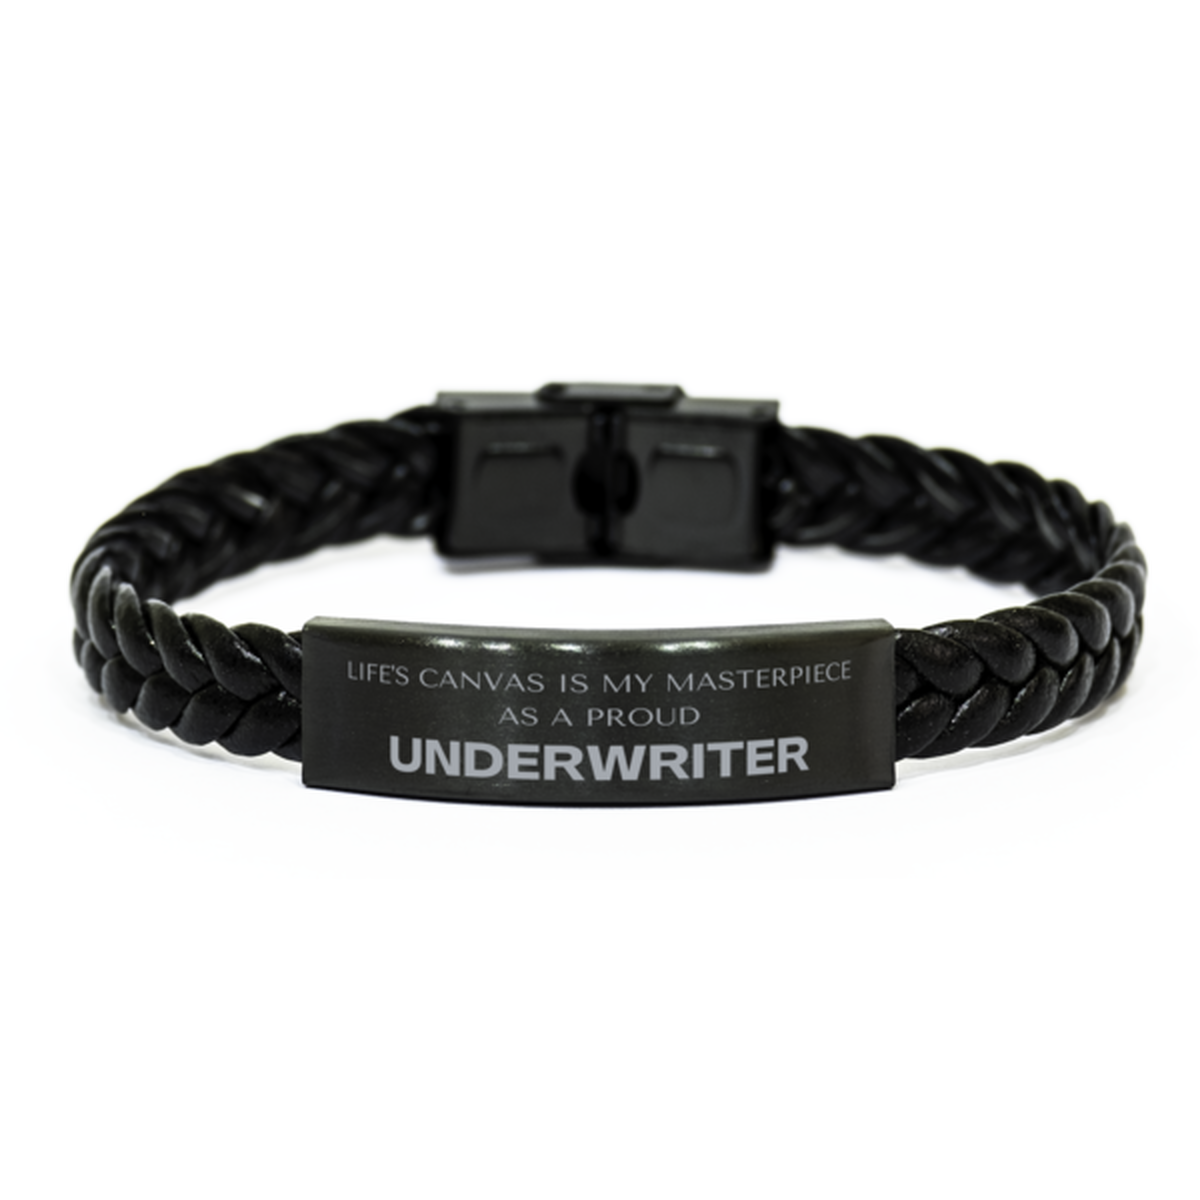 Proud Underwriter Gifts, Life's canvas is my masterpiece, Epic Birthday Christmas Unique Braided Leather Bracelet For Underwriter, Coworkers, Men, Women, Friends